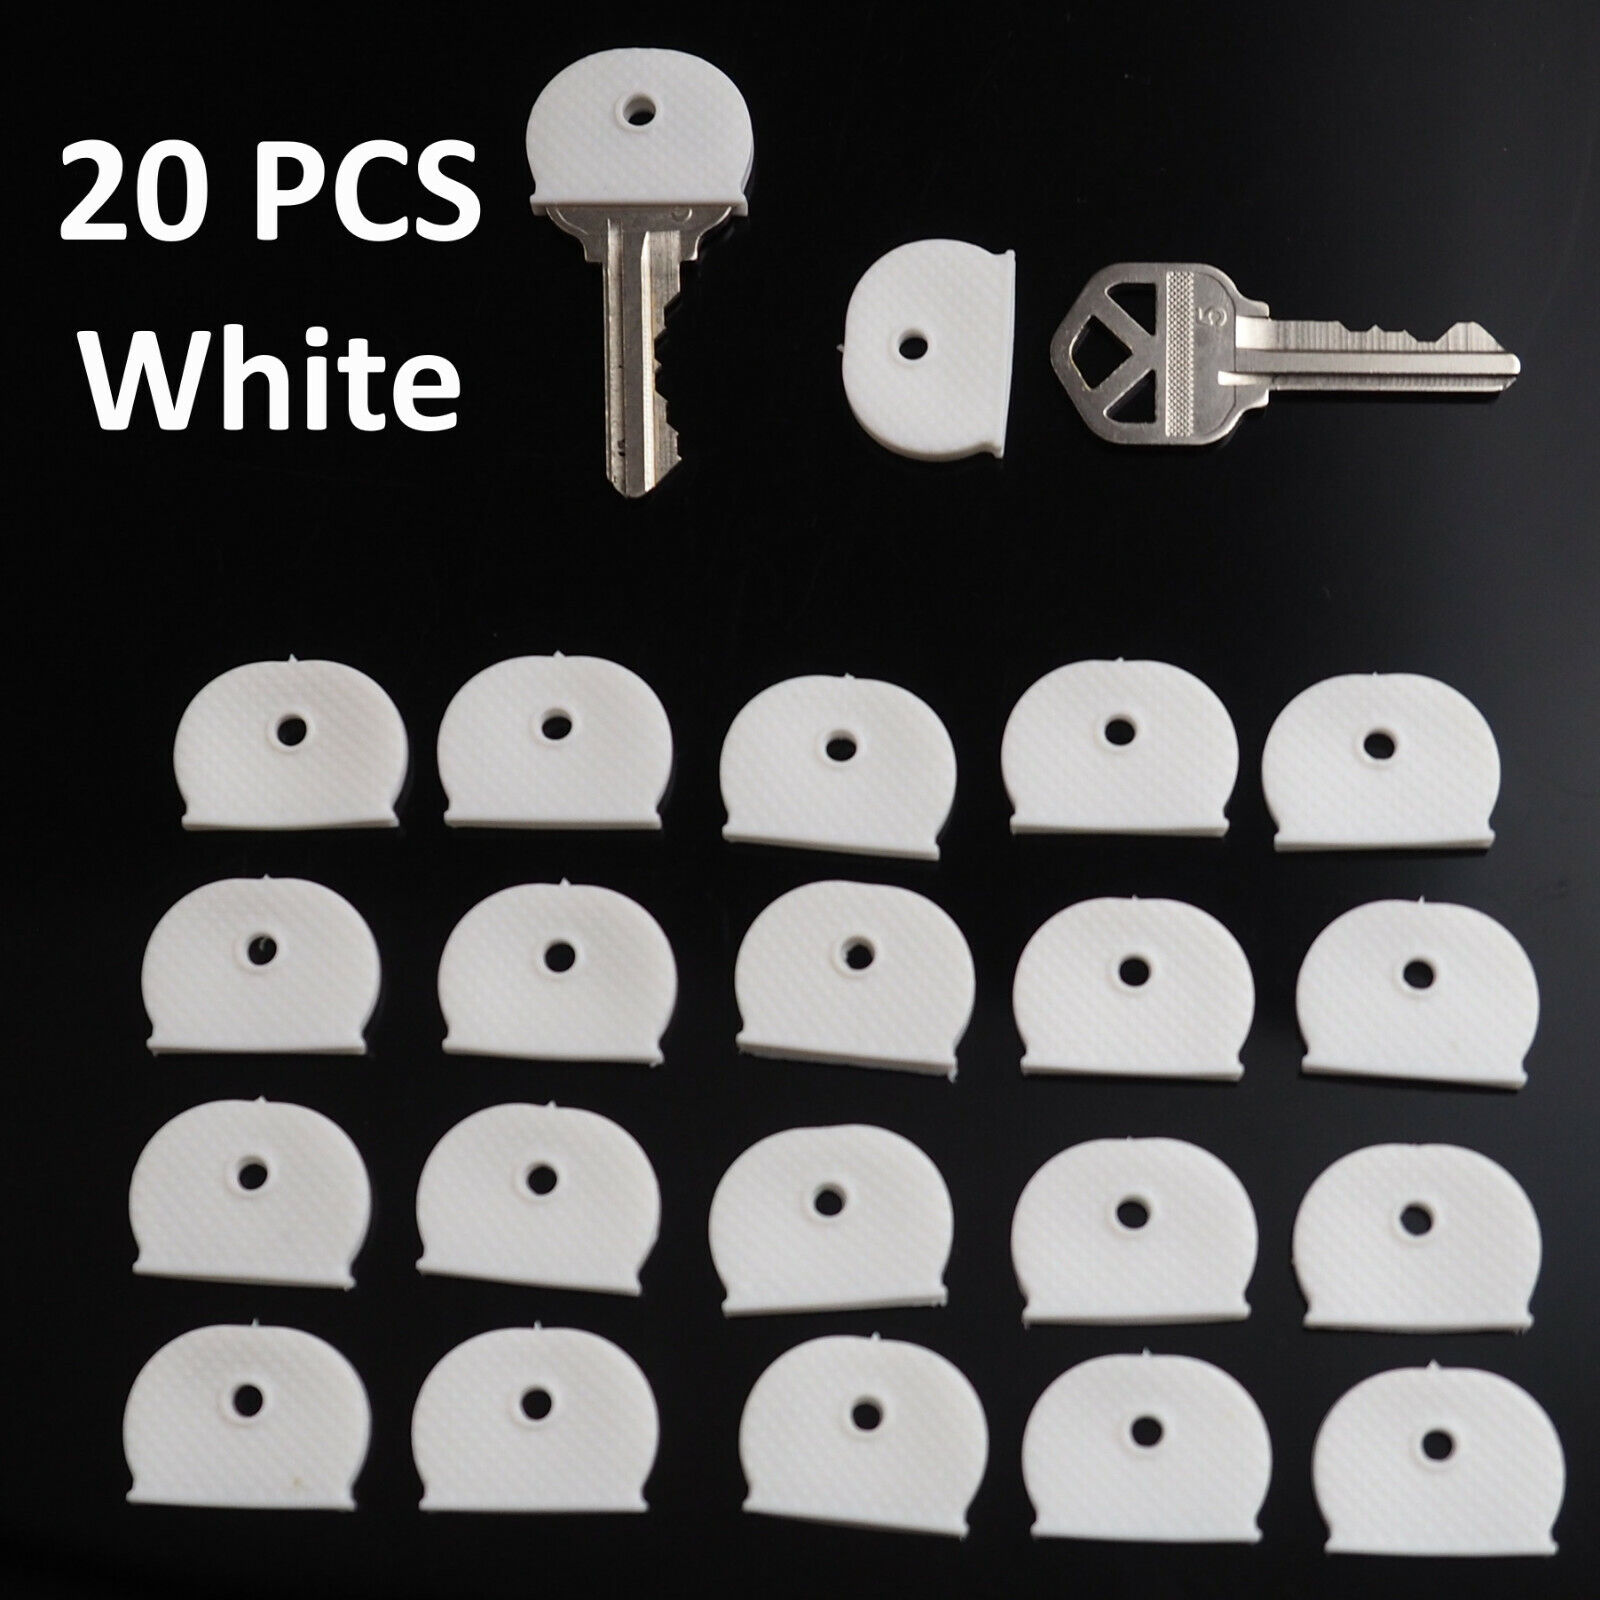 20x Key ID Caps Rubber Identifier Top Cover Topper Ring Hat Shape - White Color